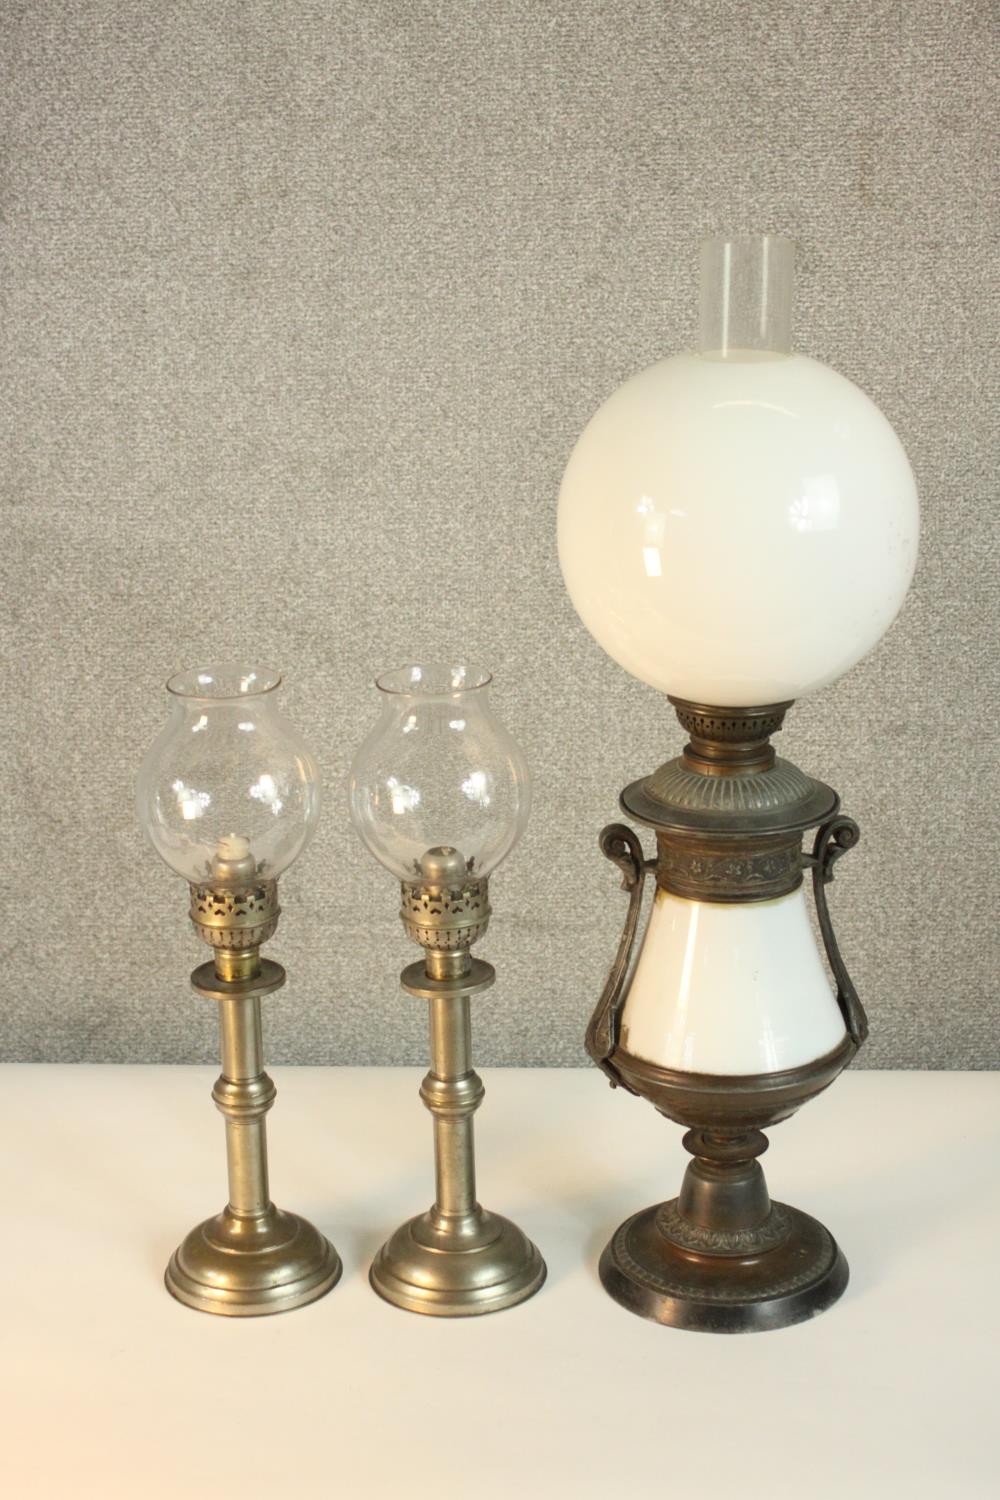 A pair of Victorian silver plated candlesticks, with glass storm shades, together with a converted